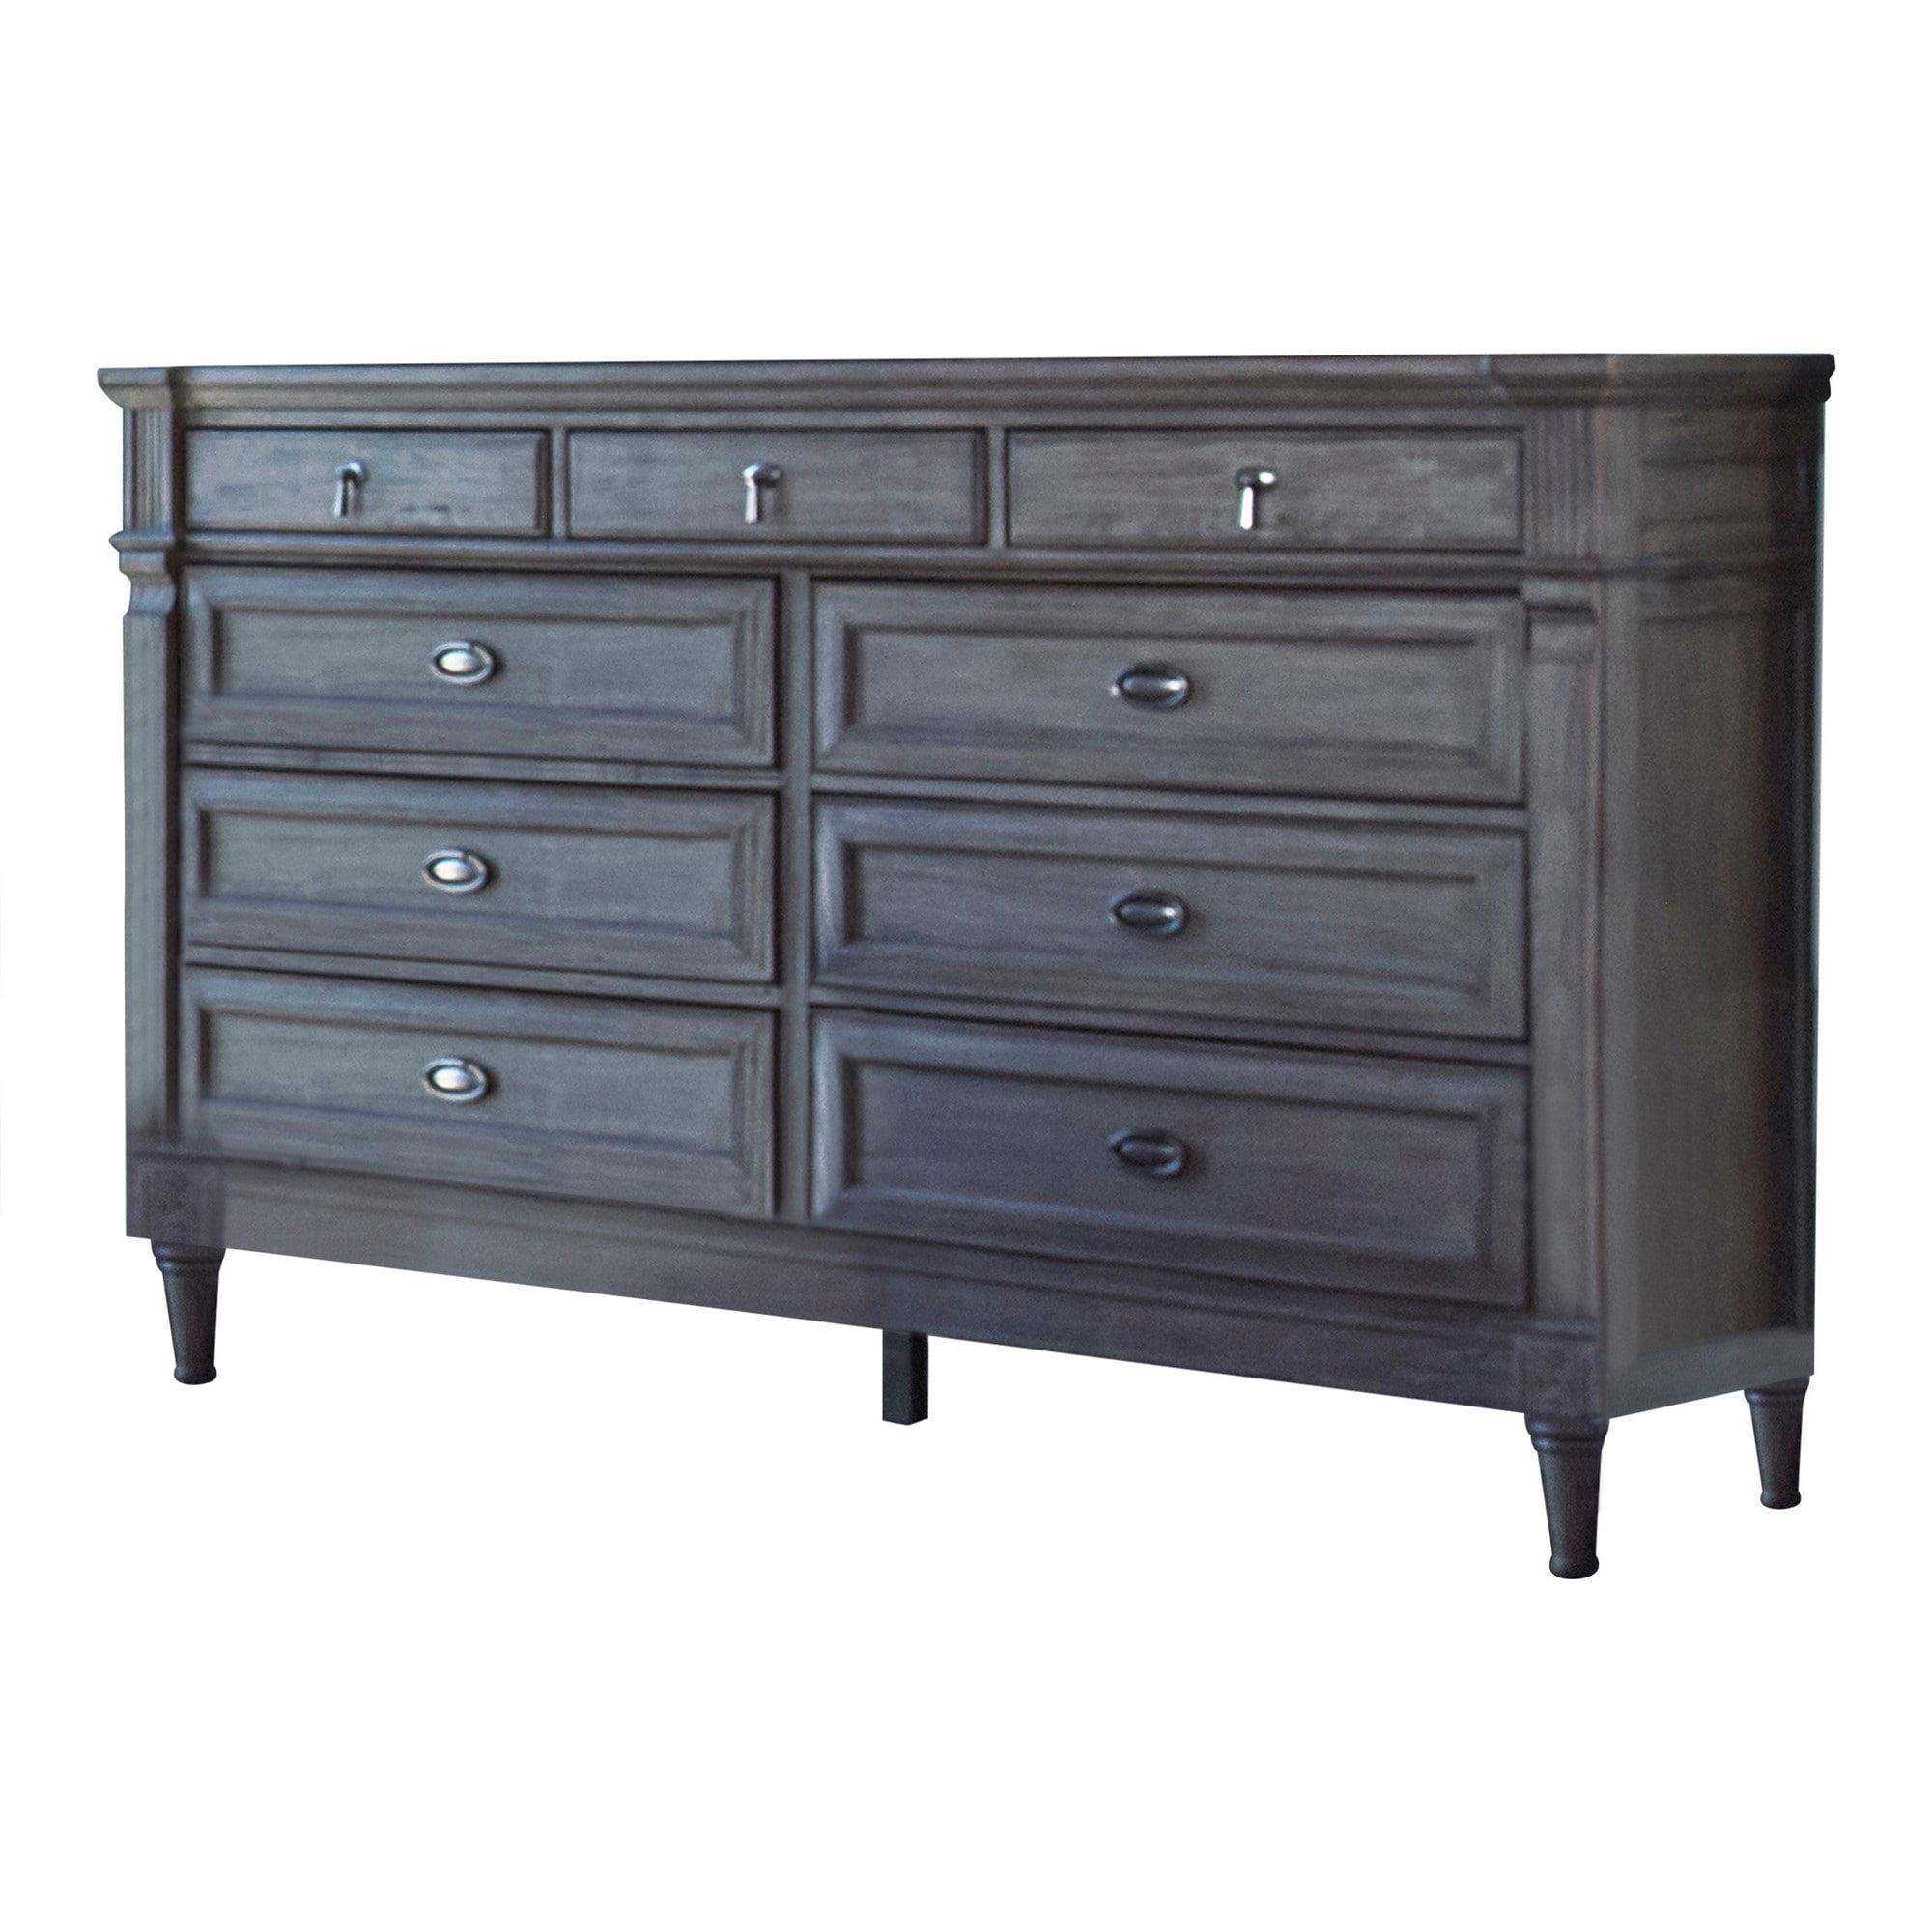 Dexi Mid-Century 65" Dresser with Felt-Lined Jewelry Drawer in Gray